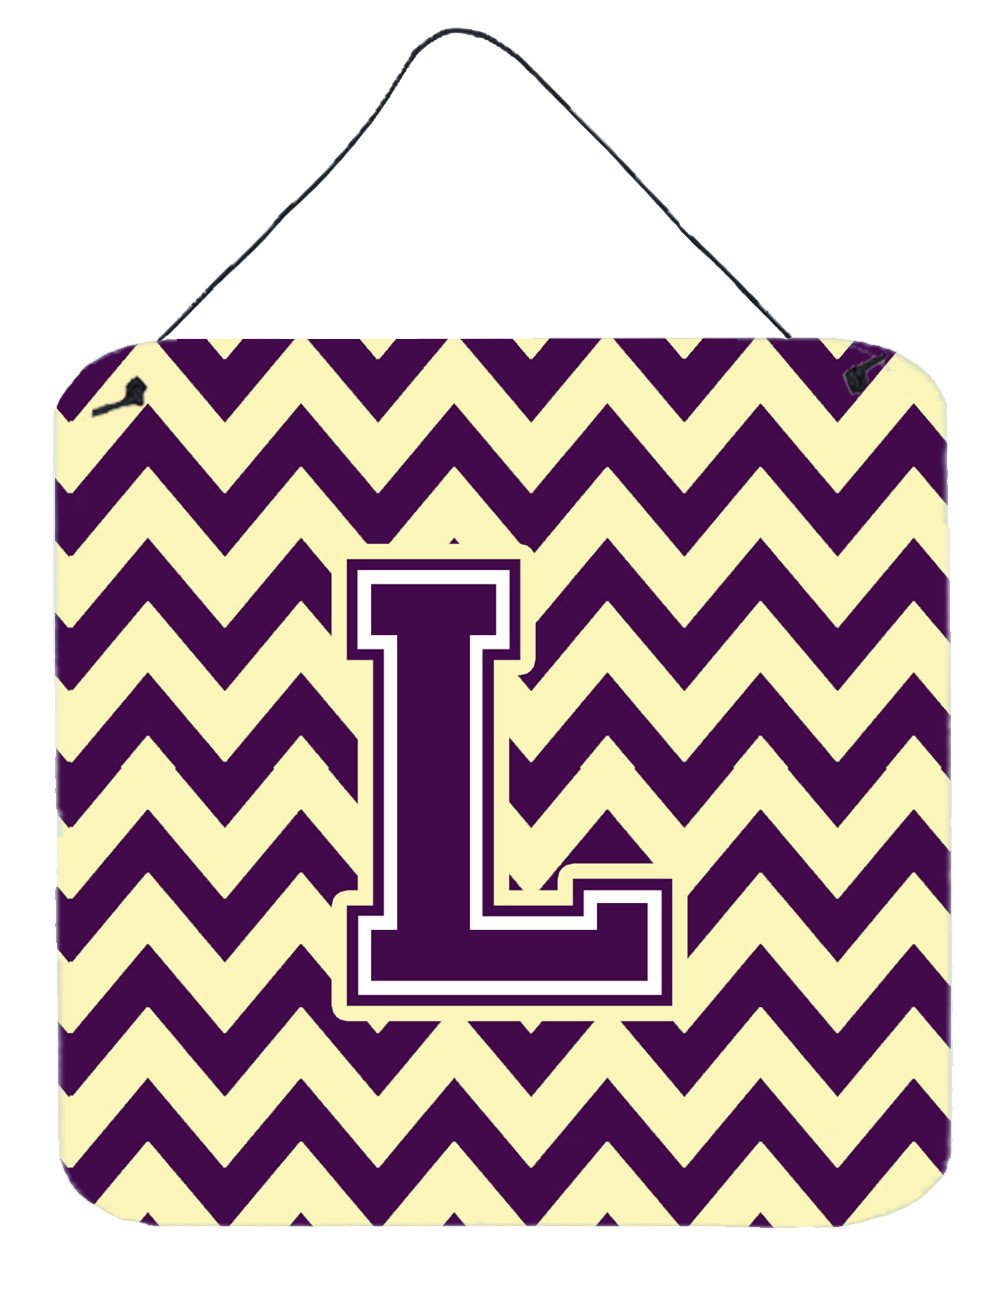 Letter L Chevron Purple and Gold Wall or Door Hanging Prints CJ1058-LDS66 by Caroline's Treasures